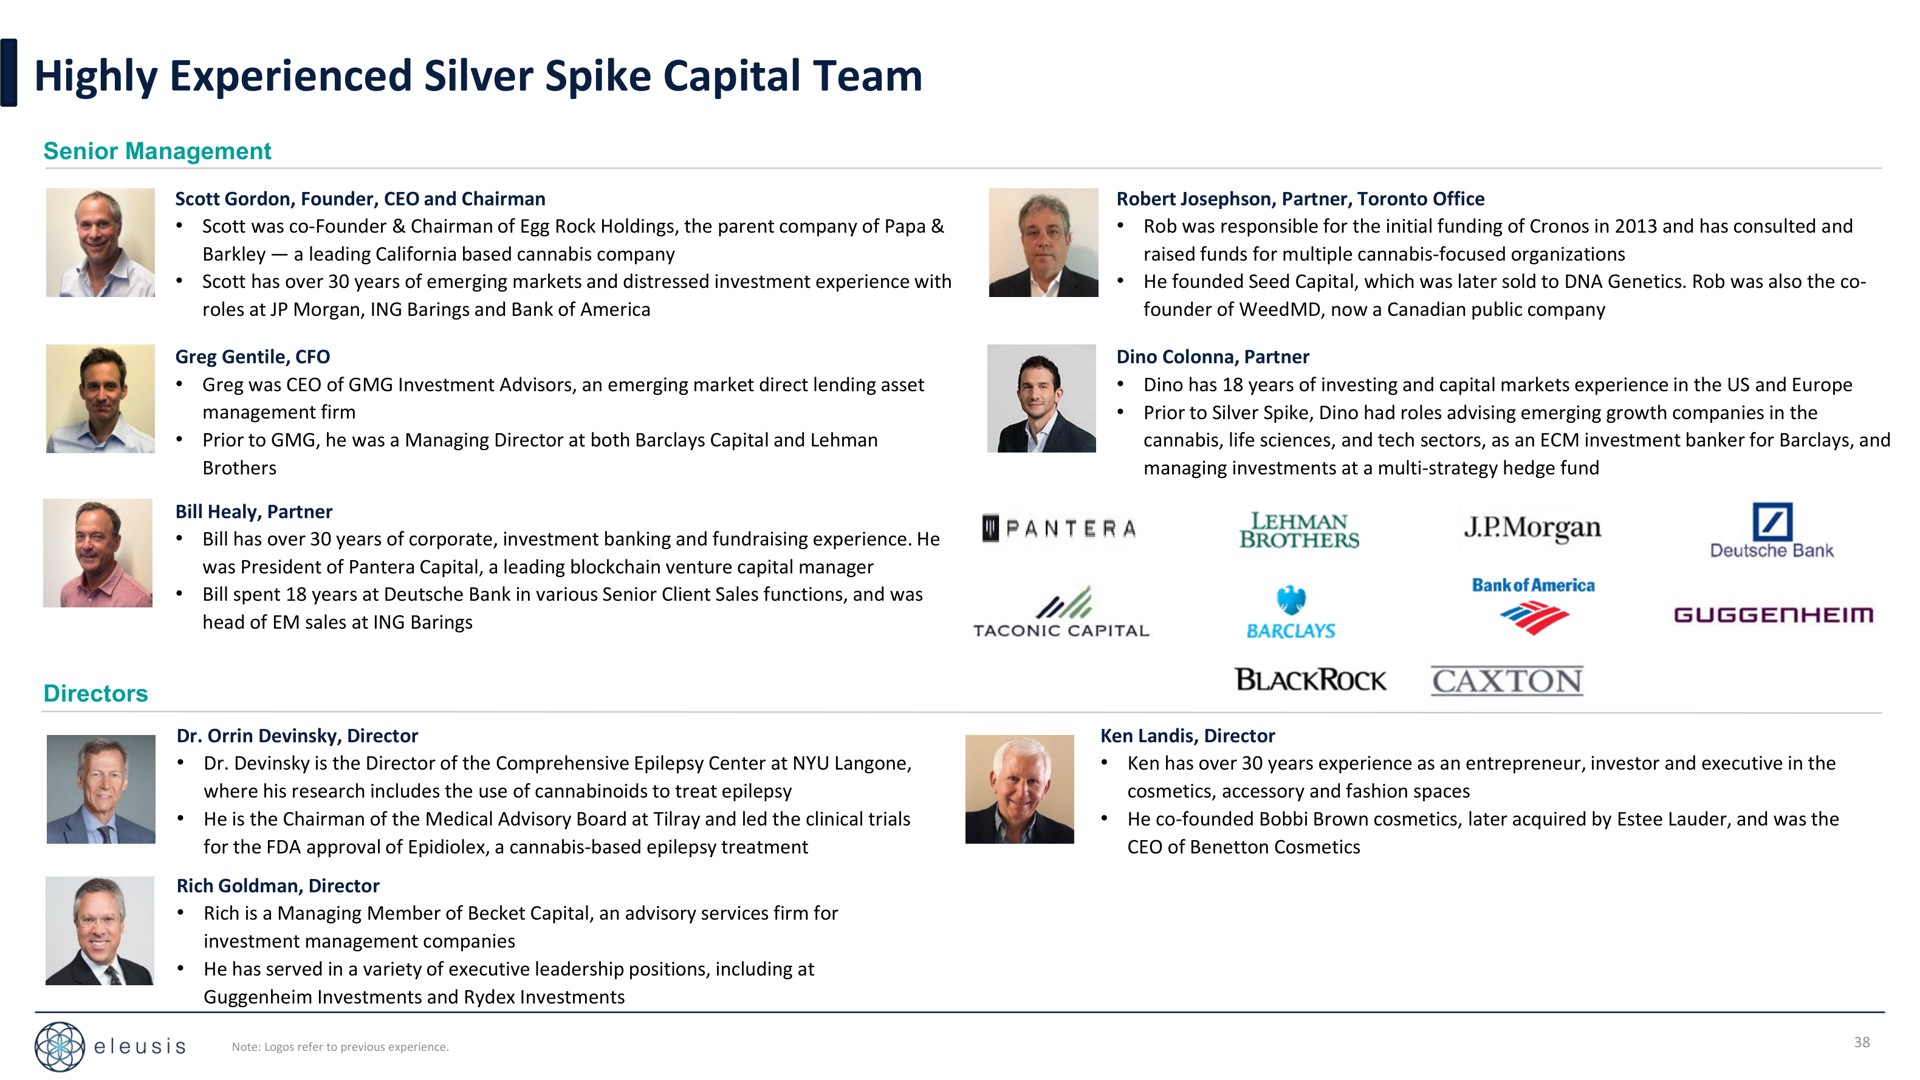 highly experienced silver spike capital team ose | Eleusis